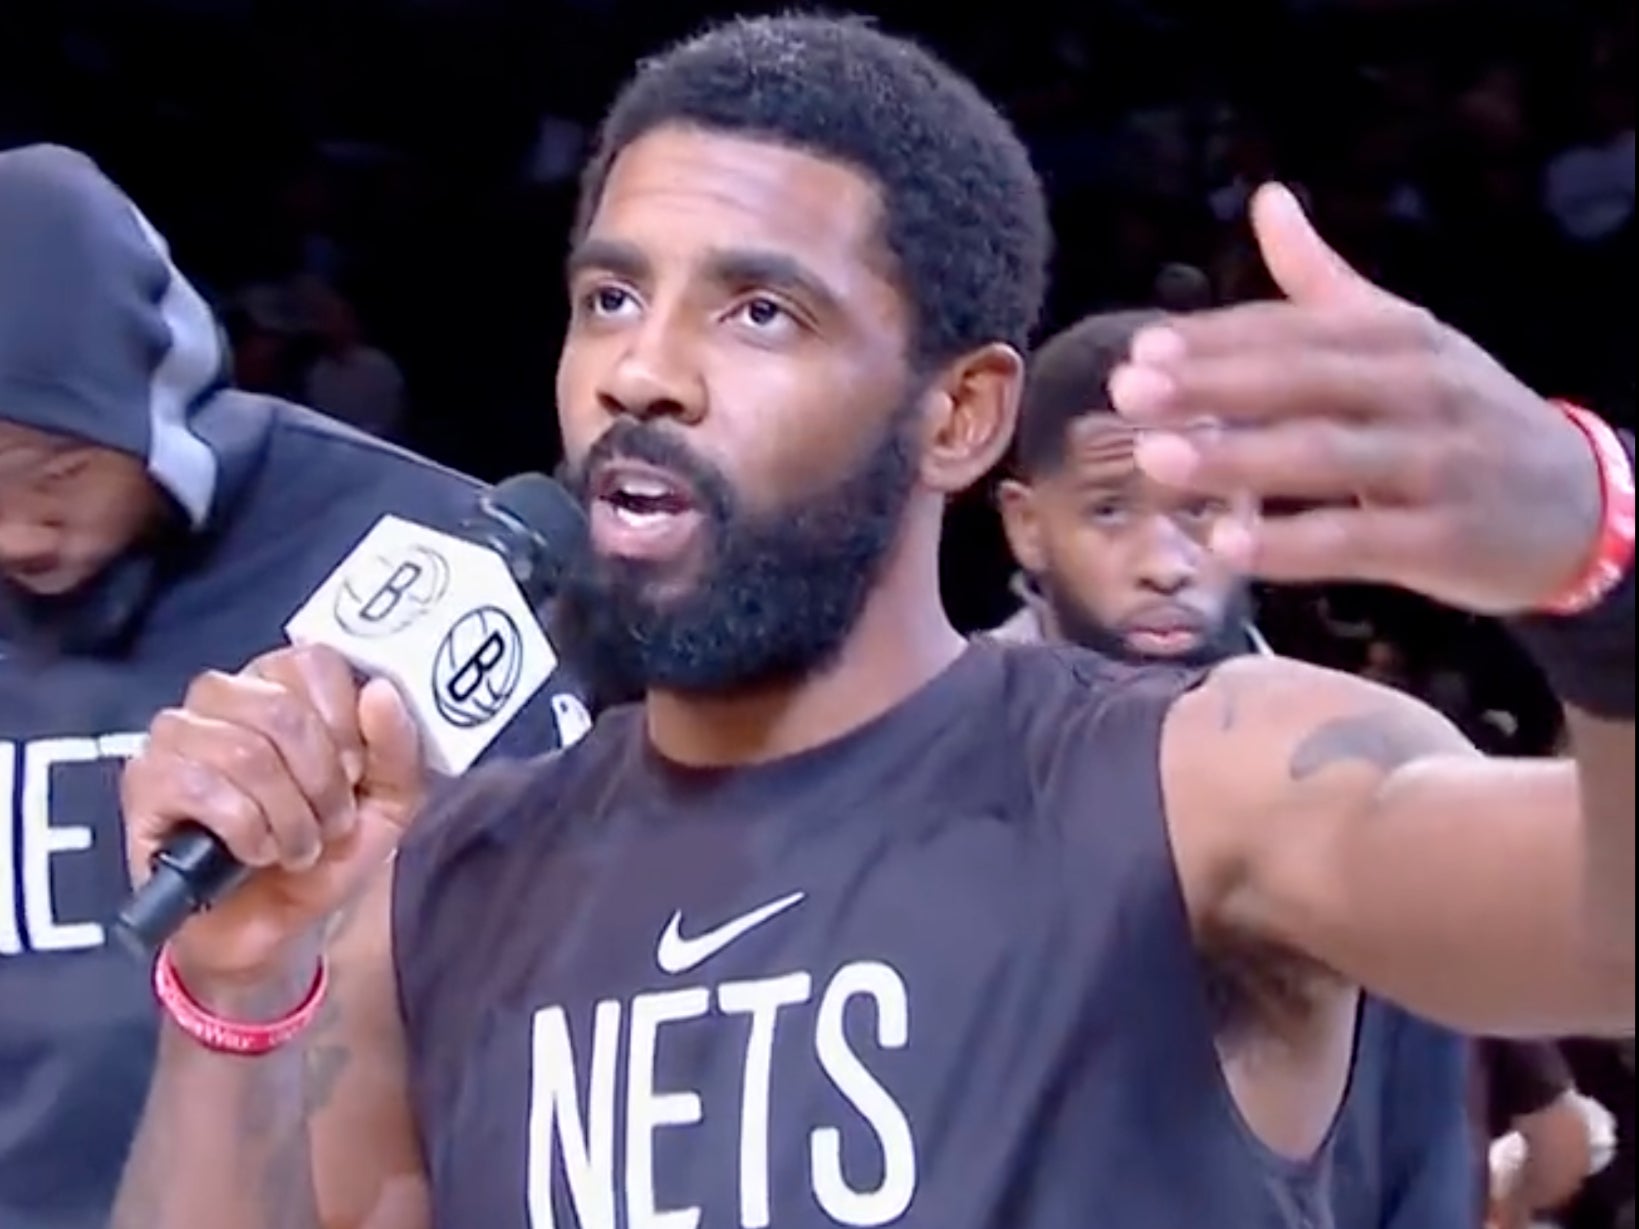 Brooklyn Nets star Kyrie Irving calls on Joe Biden and ‘everyone’ to ‘do your jobs’ and bring WNBA star Brittney Griner home